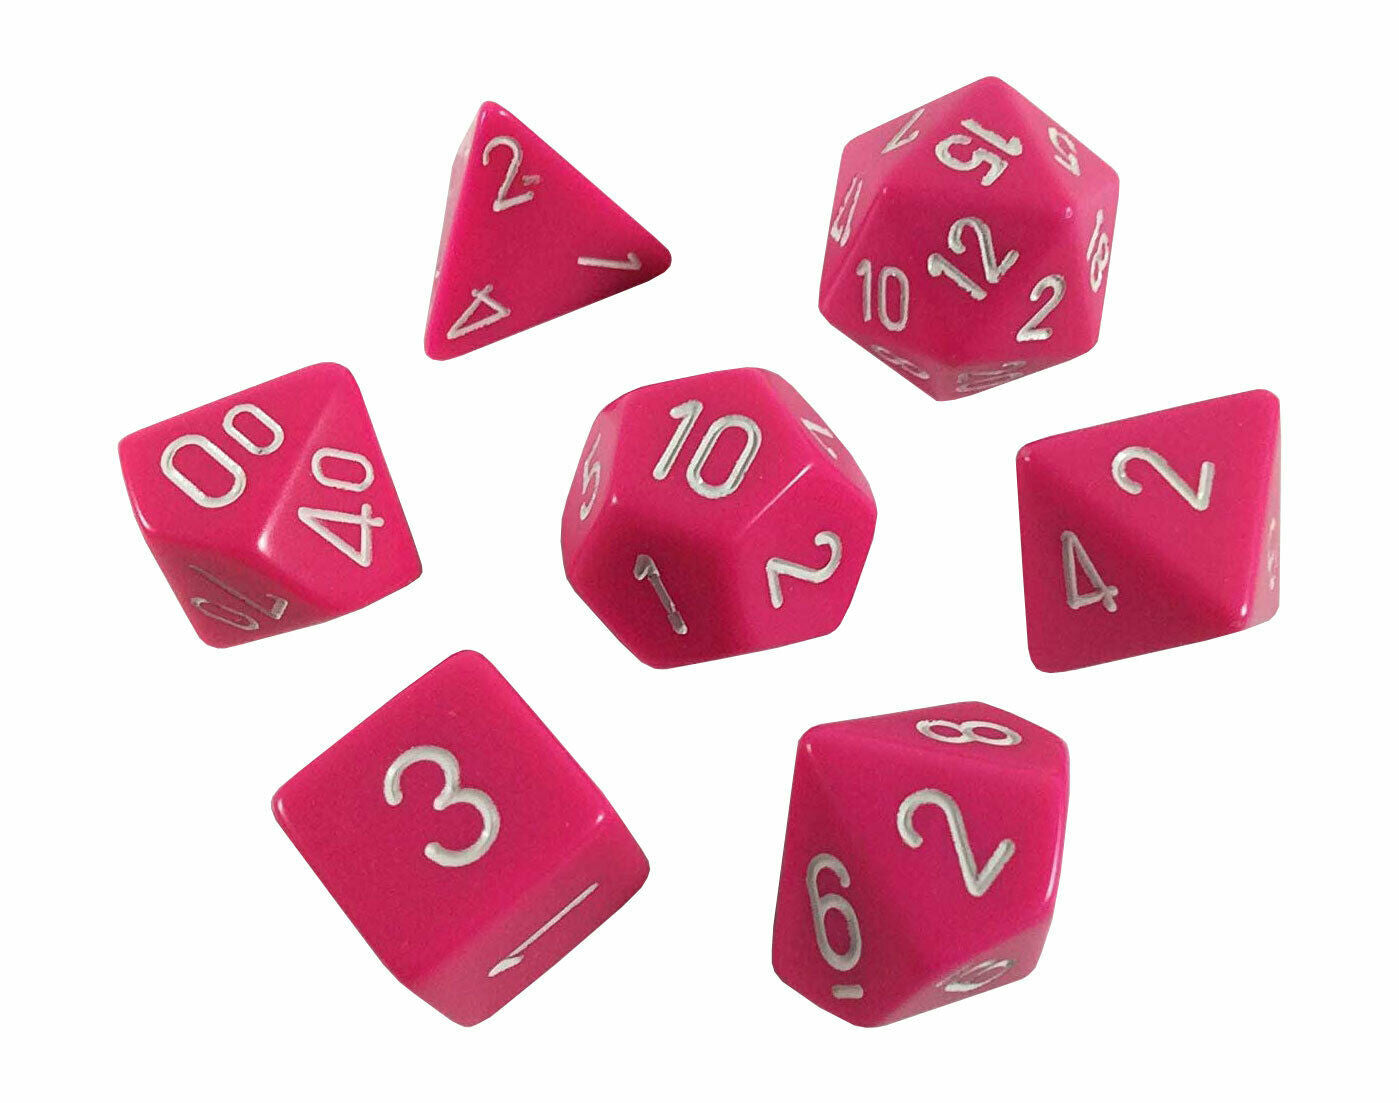 Chessex Opaque: 7pc Polyhedral Dice Sets | Kessel Run Games Inc. 